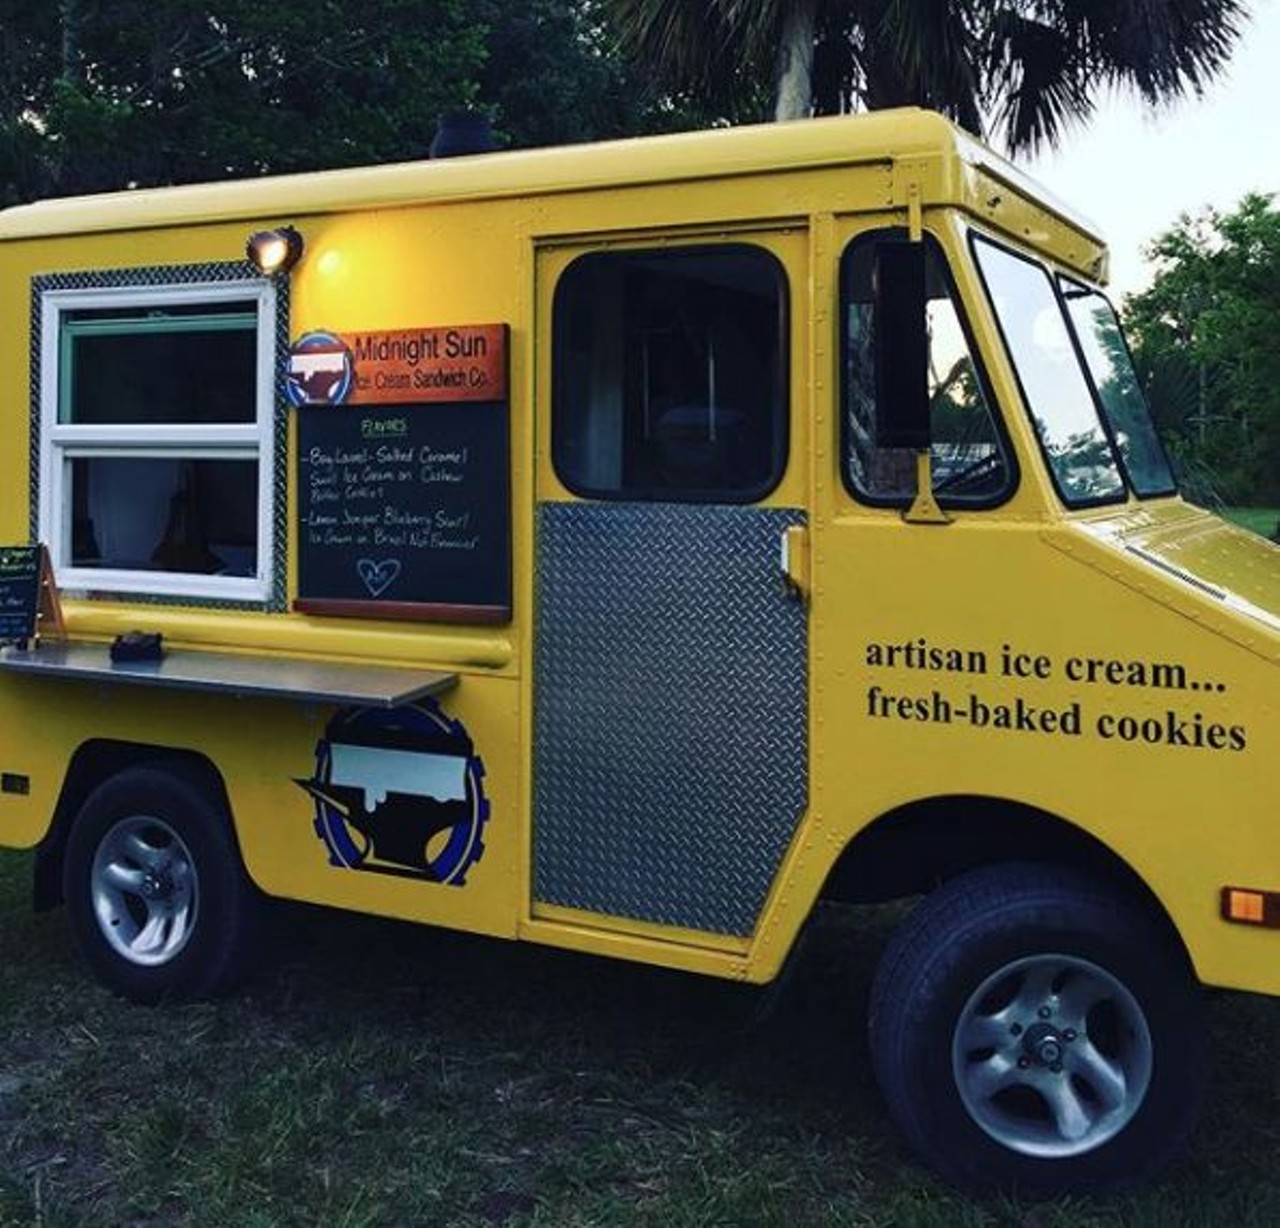 Midnight Sun Ice Cream Sandwich Co.
DeLand 
This cute little yellow truck serves big flavors on the streets of DeLand in the form of artisan ice cream scooped between freshly baked cookies. Spoil your taste buds with their dulce de leche and butter pecan ice cream scoop between churro cake or the saffron pistachio rose ice cream mix on cardamom shortbread cookies. You can check the calendar on their website to find their truck or stop by one of their favorite hangouts, the Artisan Alley Farmers Market in DeLand on Fridays from 6 p.m. to 9 p.m.
Photo via Midnight Sun Ice Cream Sandwich Co./Instagram